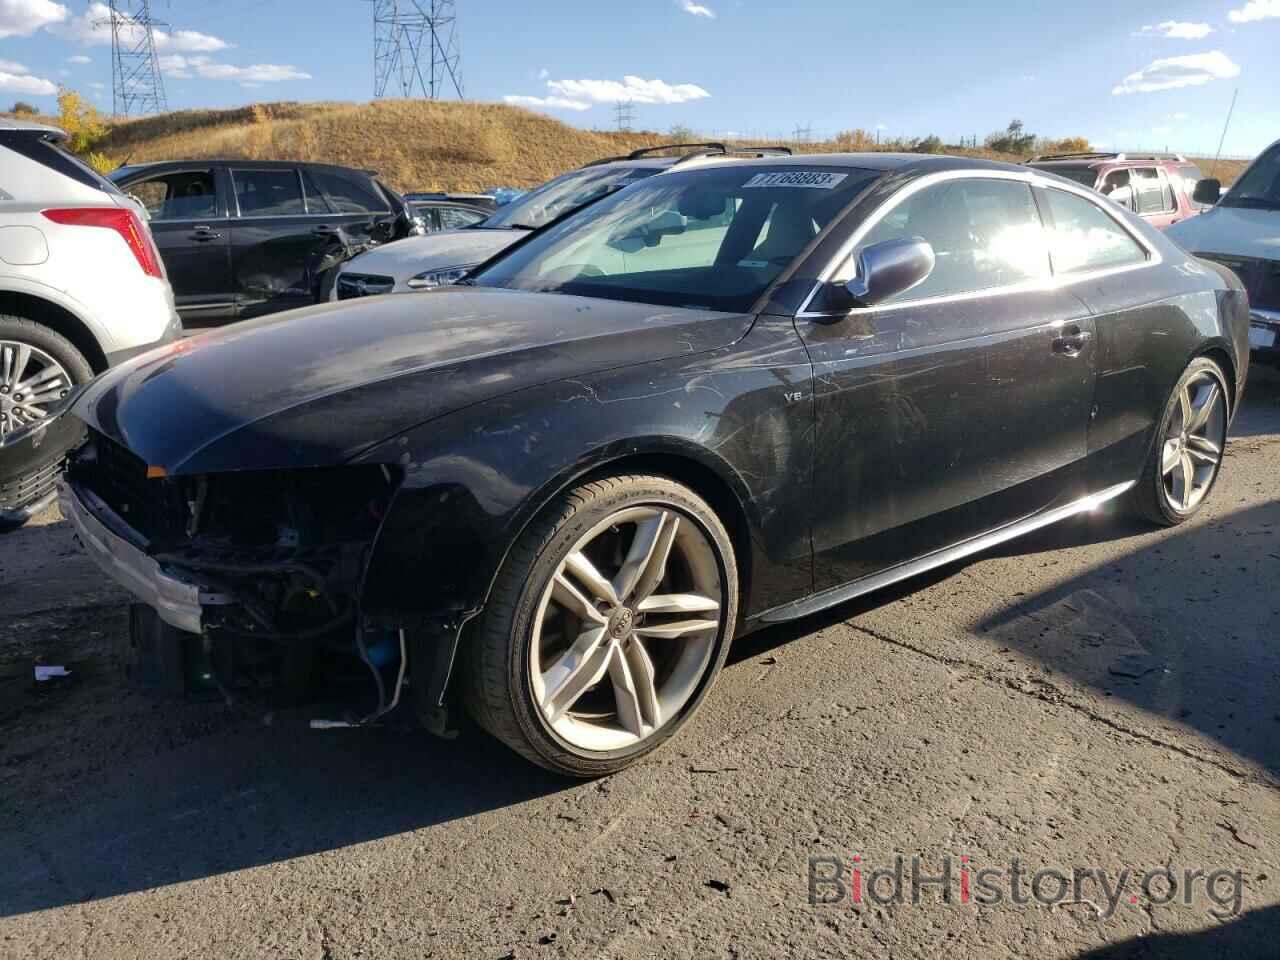 Photo WAUVVAFR5BA062488 - AUDI S5/RS5 2011